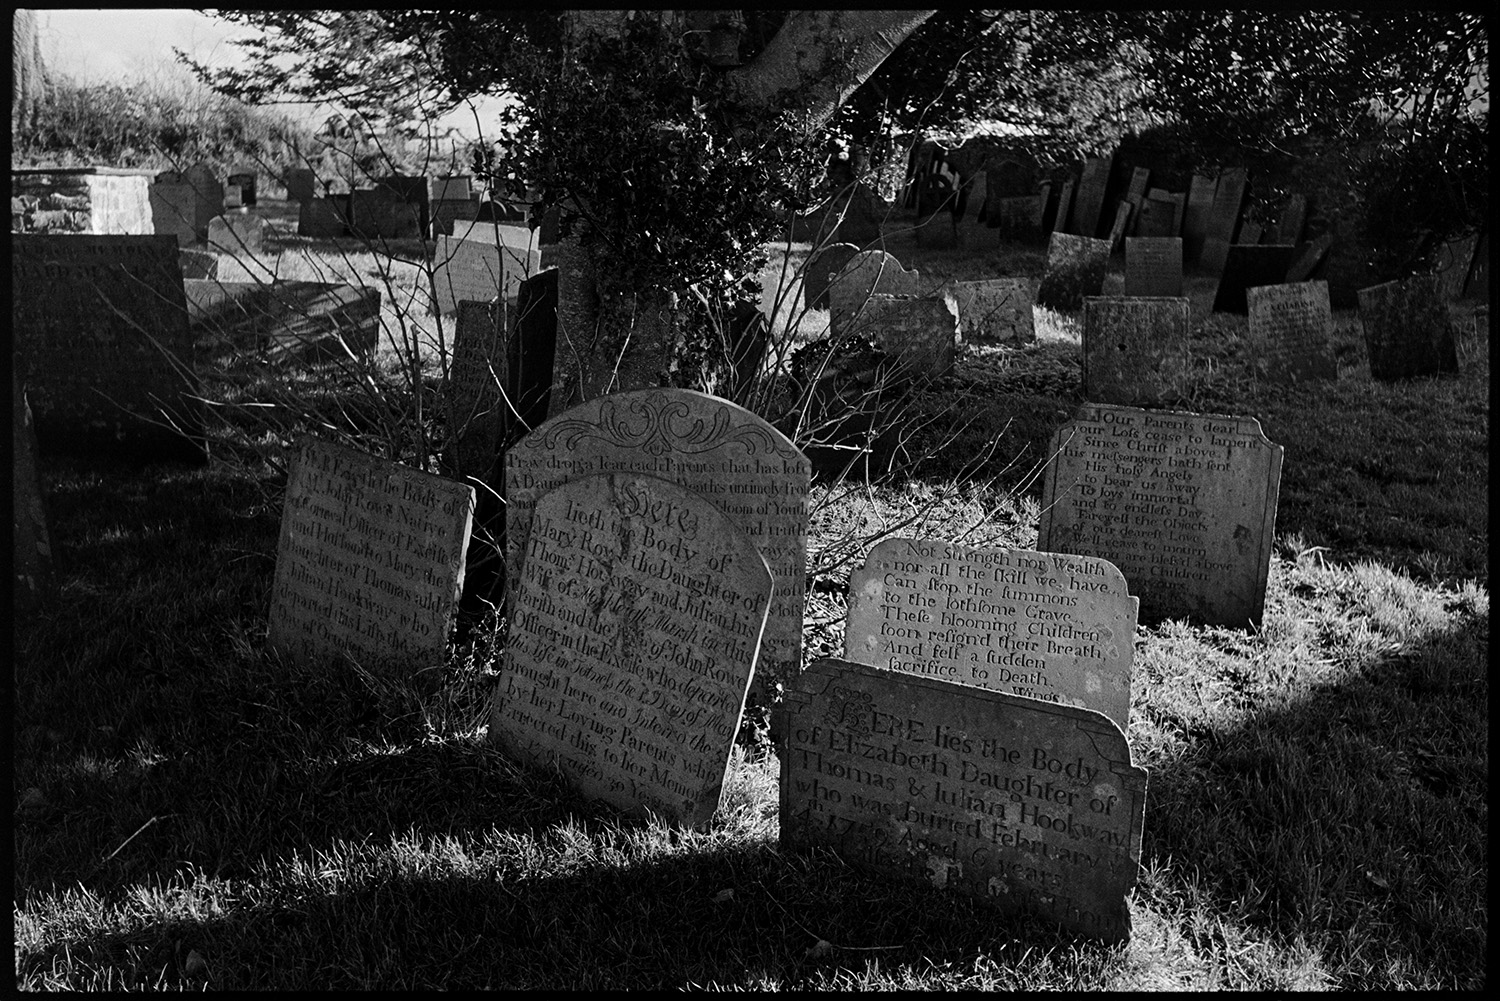 Ruined priory and graveyard.
[Headstones by a tree in the cemetery of  the Church of St Mary and St Gregory, Frithelstock.]